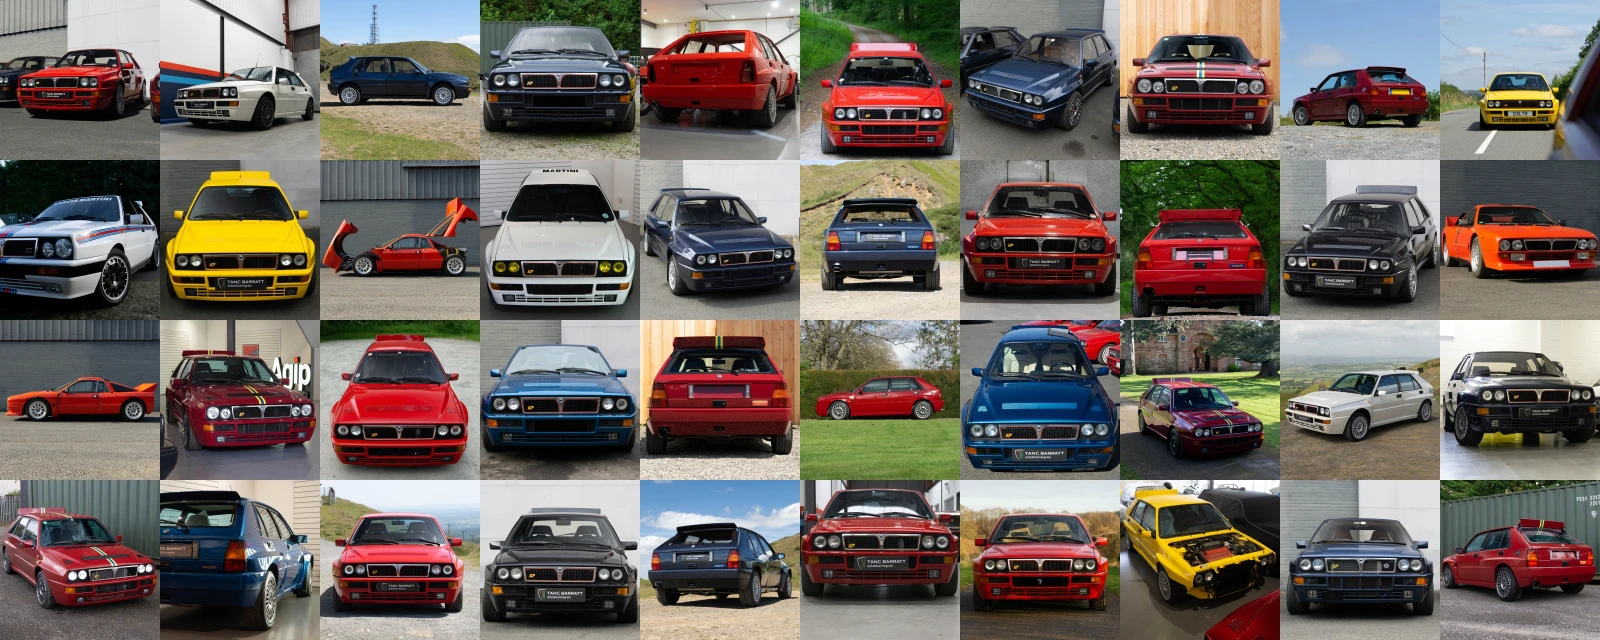 Lancia Delta photography examples in a collage